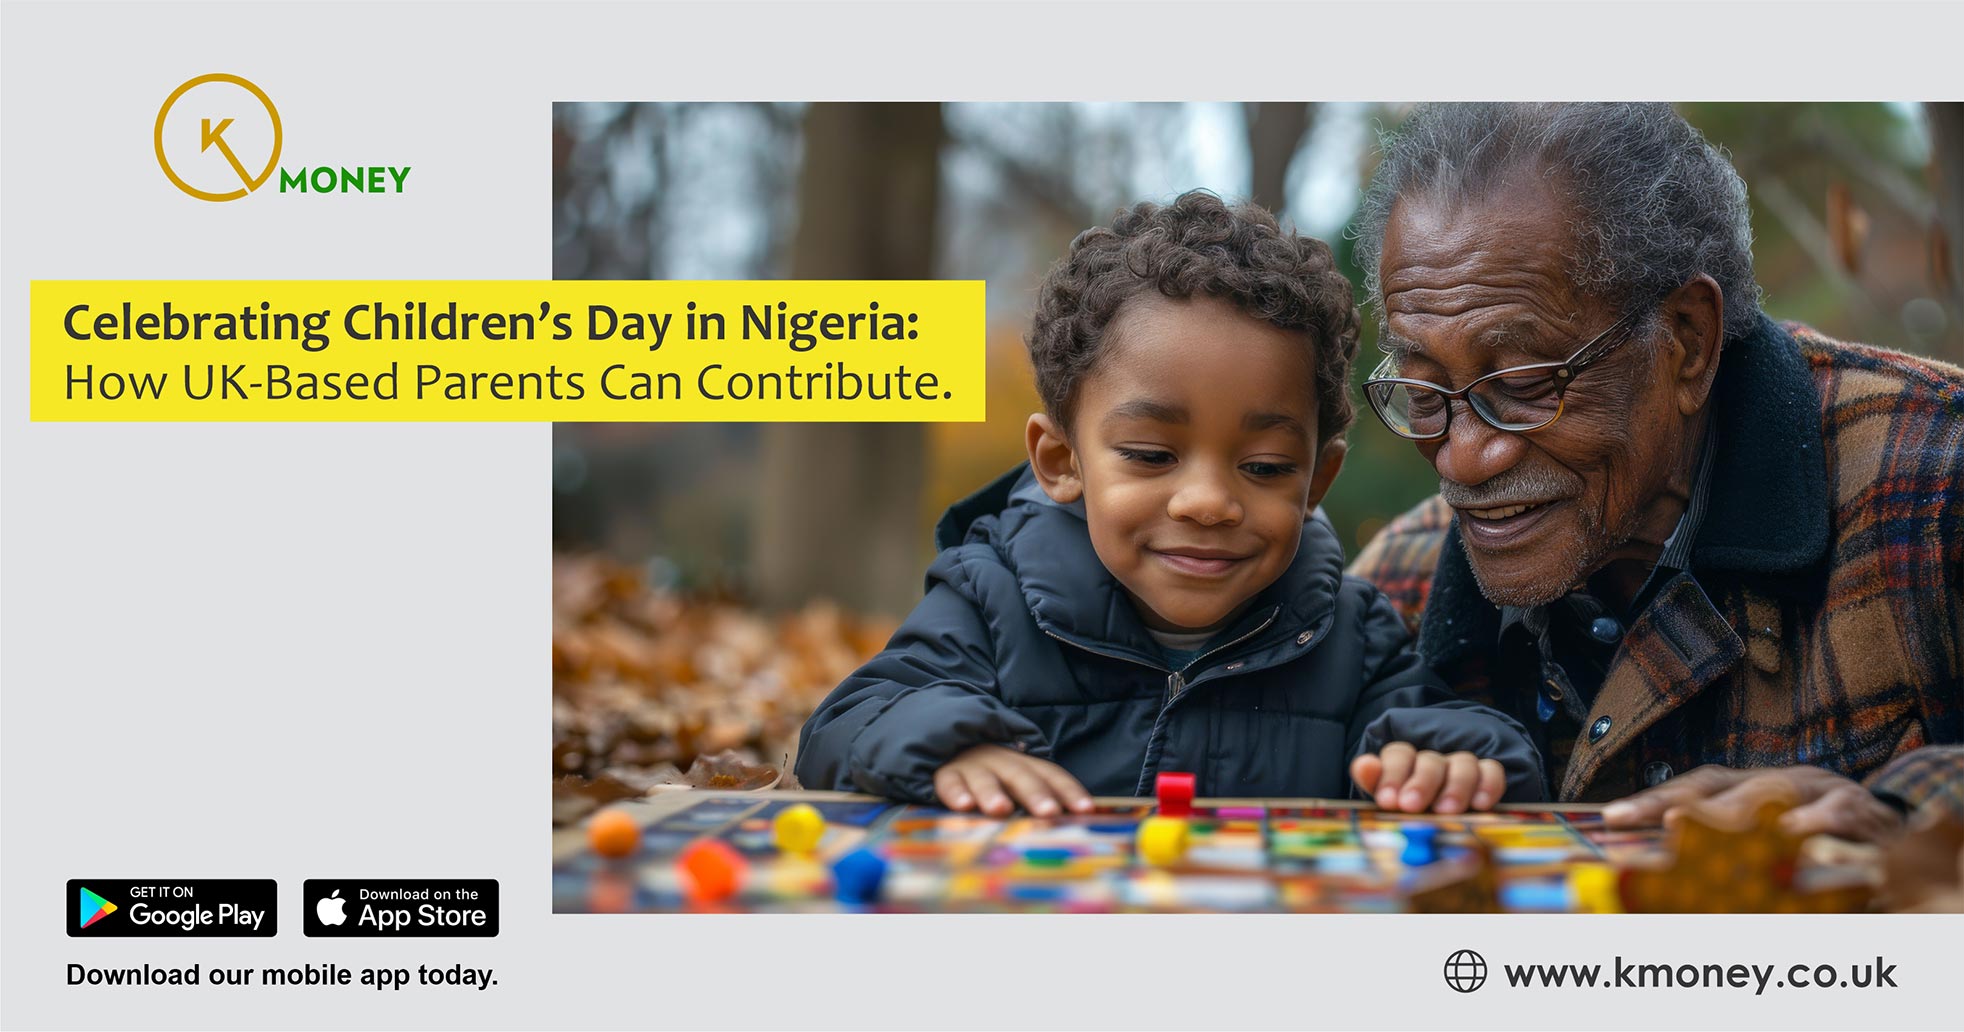 Celebrating Children's Day in Nigeria: How UK-Based Parents Can Contribute